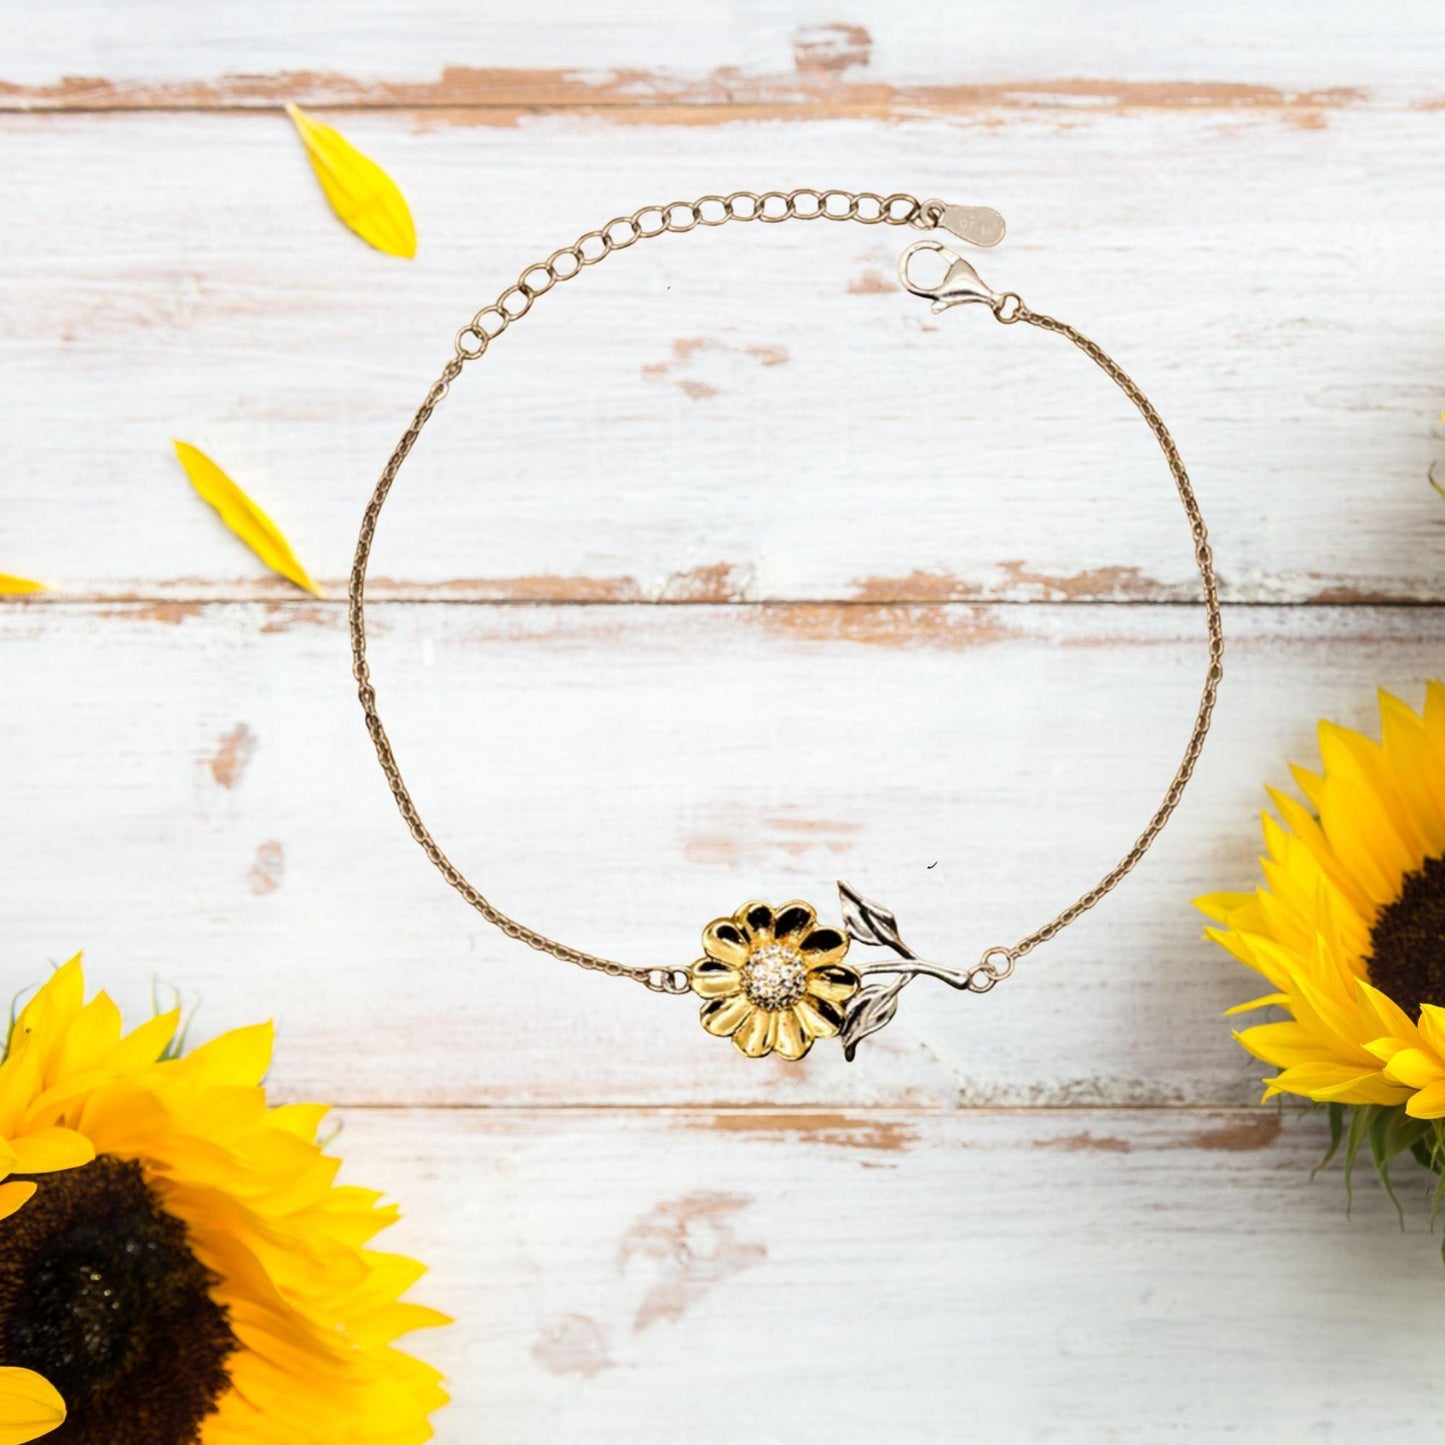 Mortician Sunflower Bracelet - Thanks for being who you are - Birthday Christmas Jewelry Gifts Coworkers Colleague Boss - Mallard Moon Gift Shop